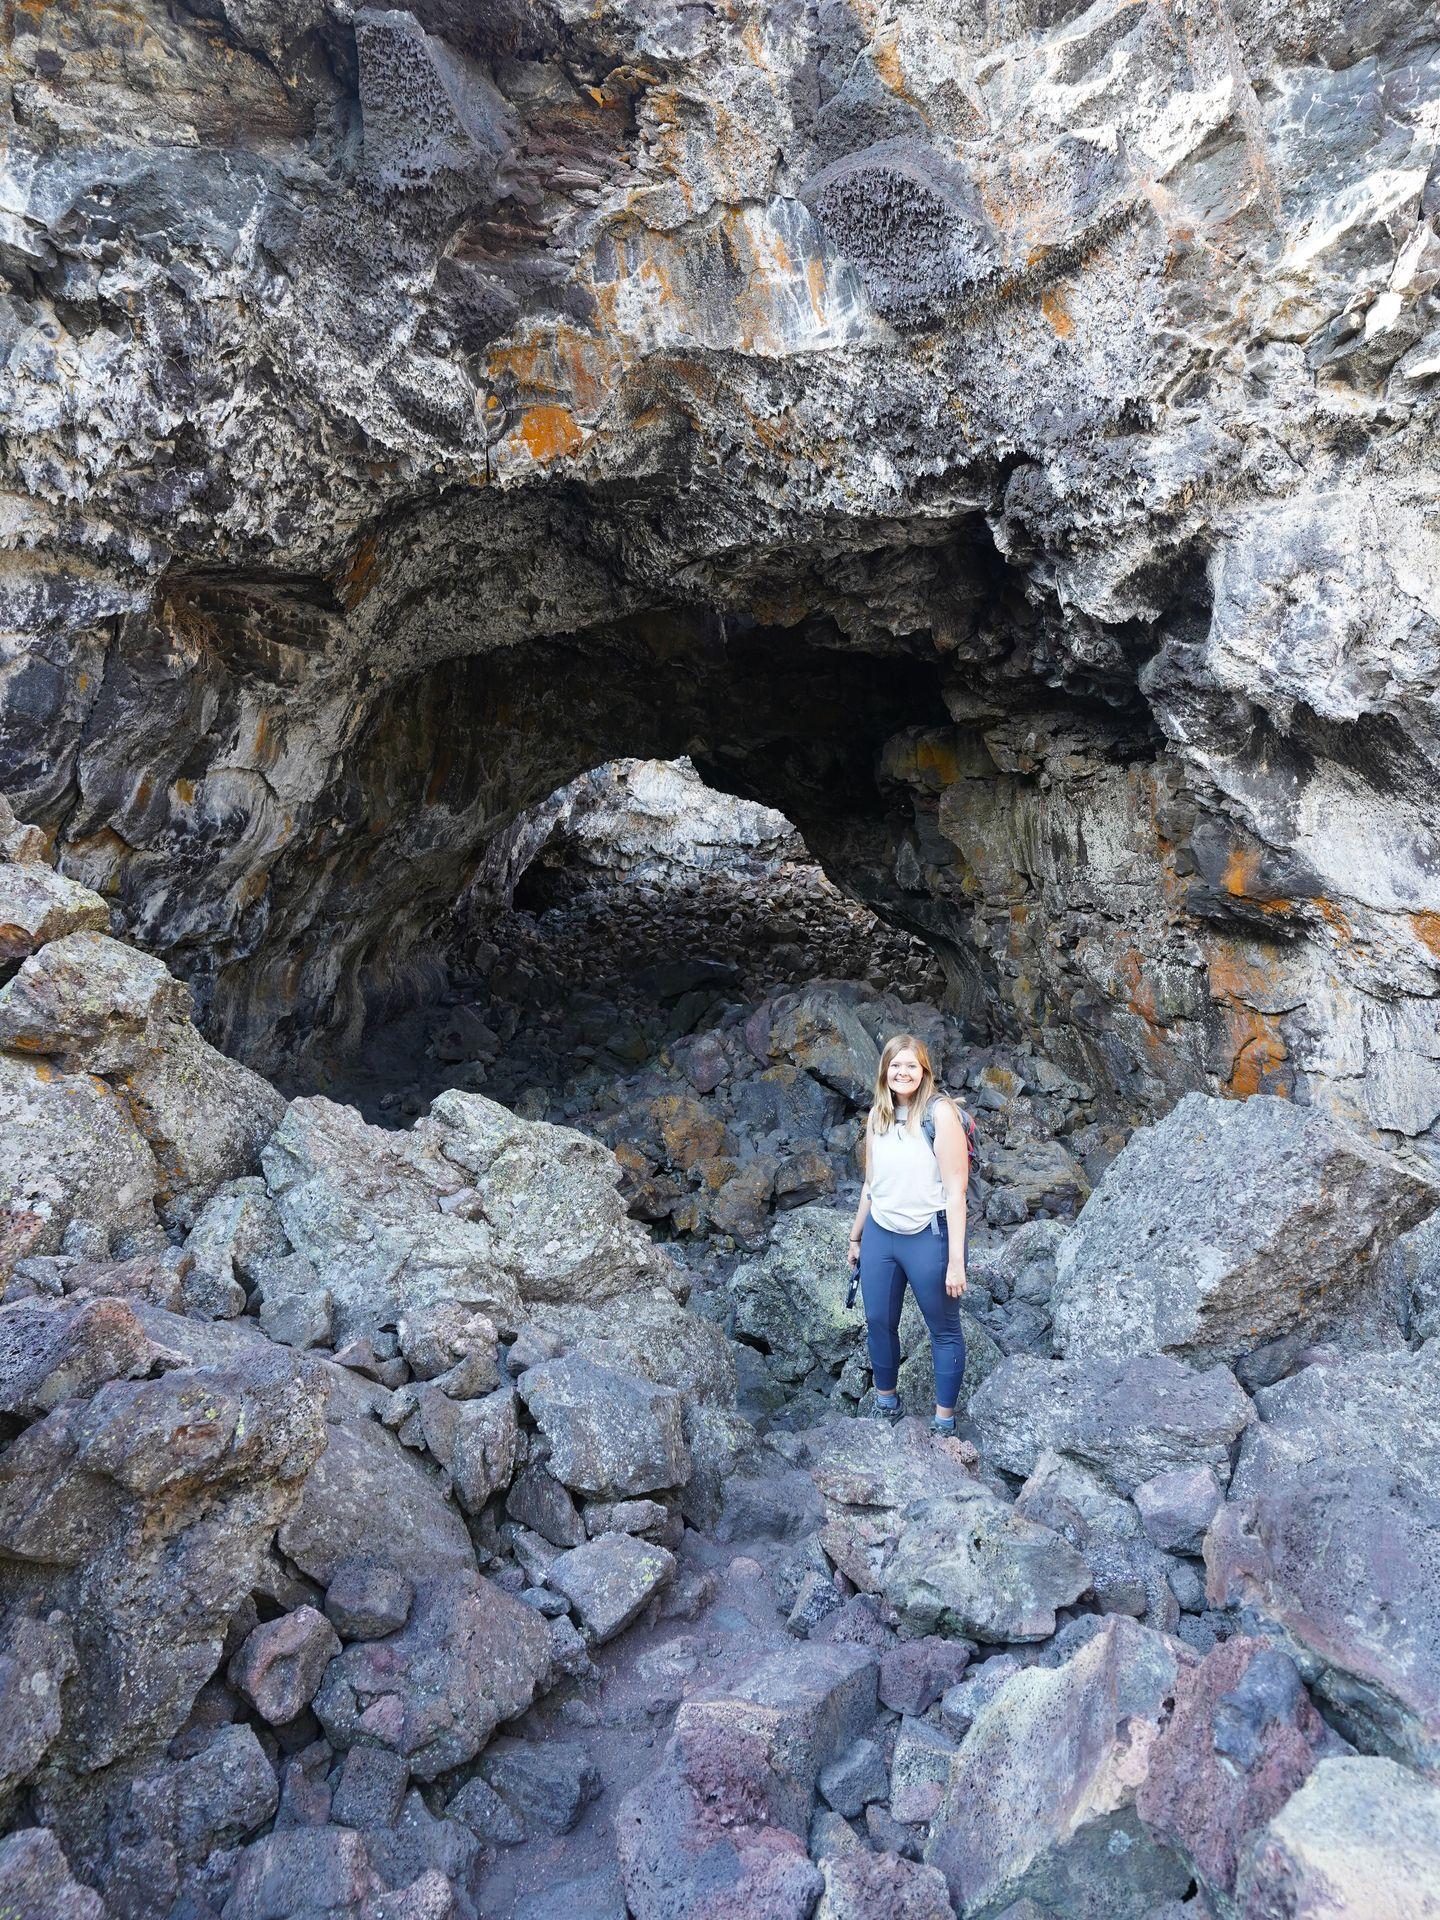 Lydia inside a large cave at Craters of the Moon.